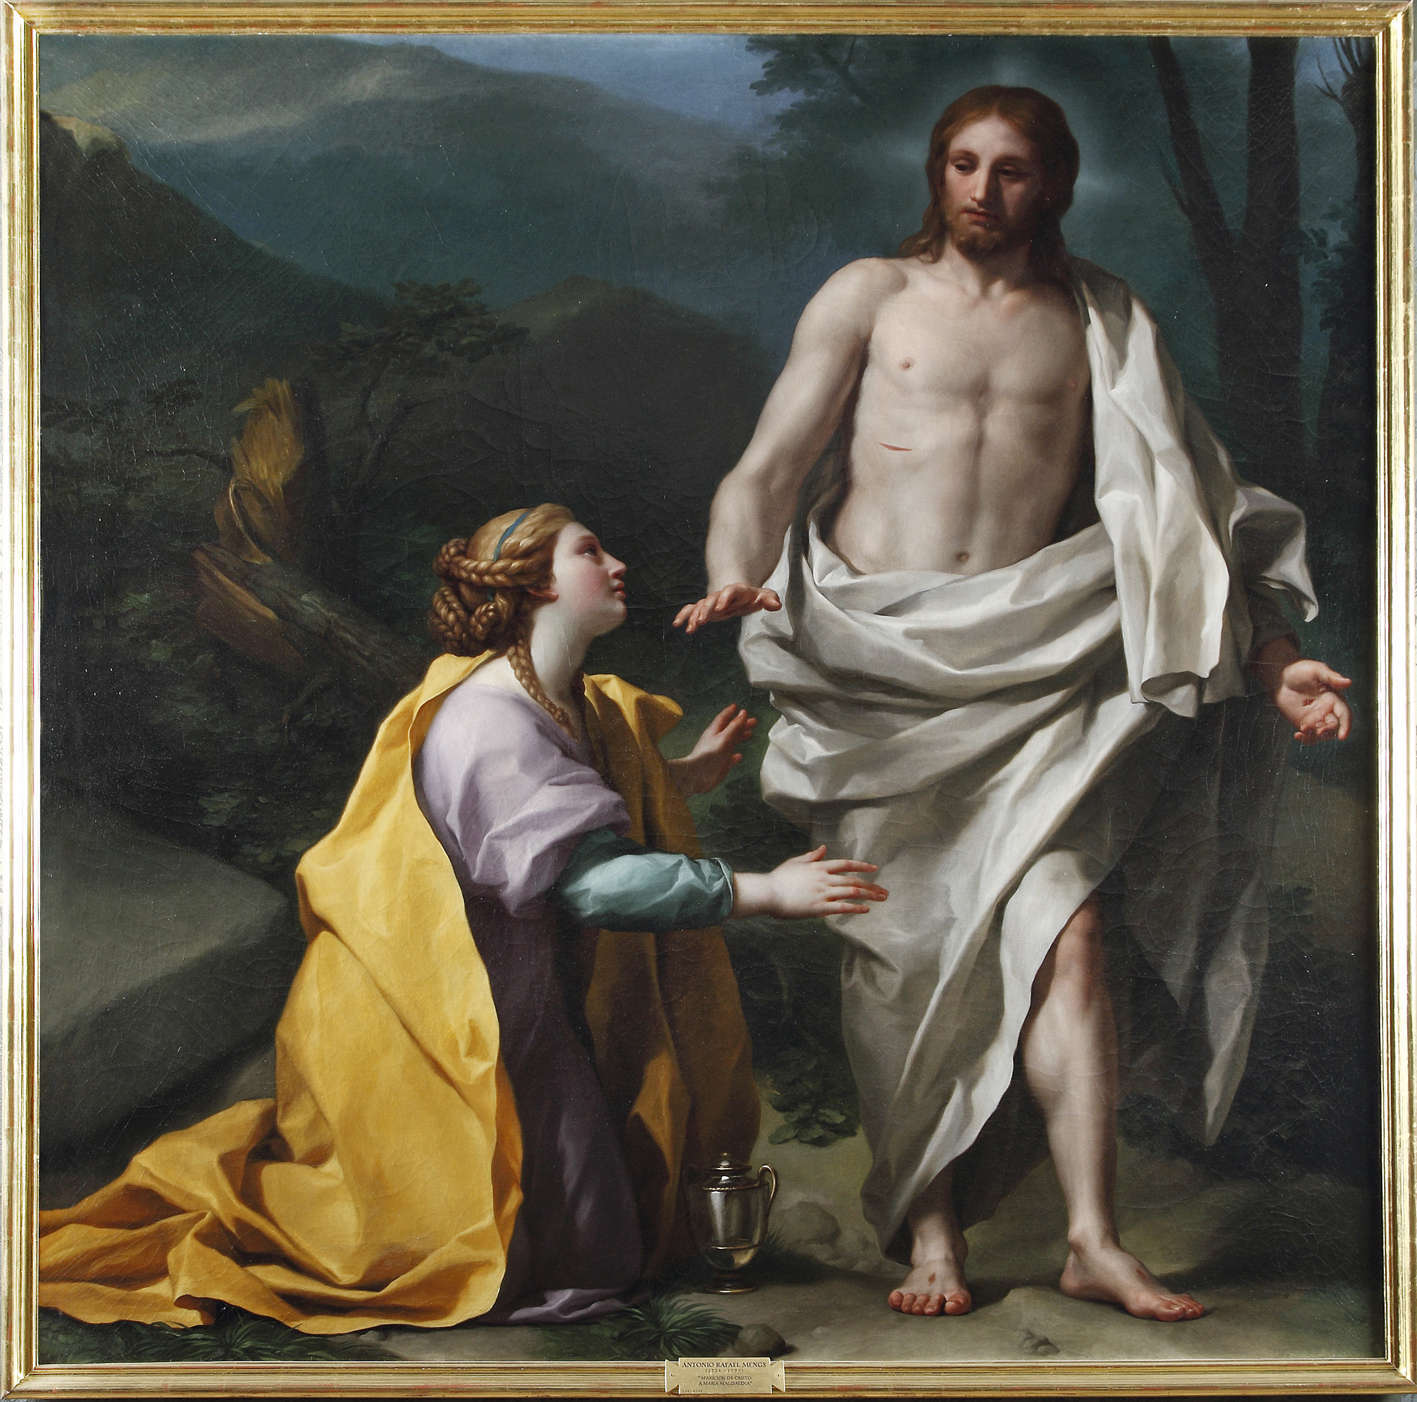 Anton Raphael Mengs, Noli me tangere (1768-1769; oil on canvas, 184 x 182 cm; Madrid, Royal Collections Gallery)